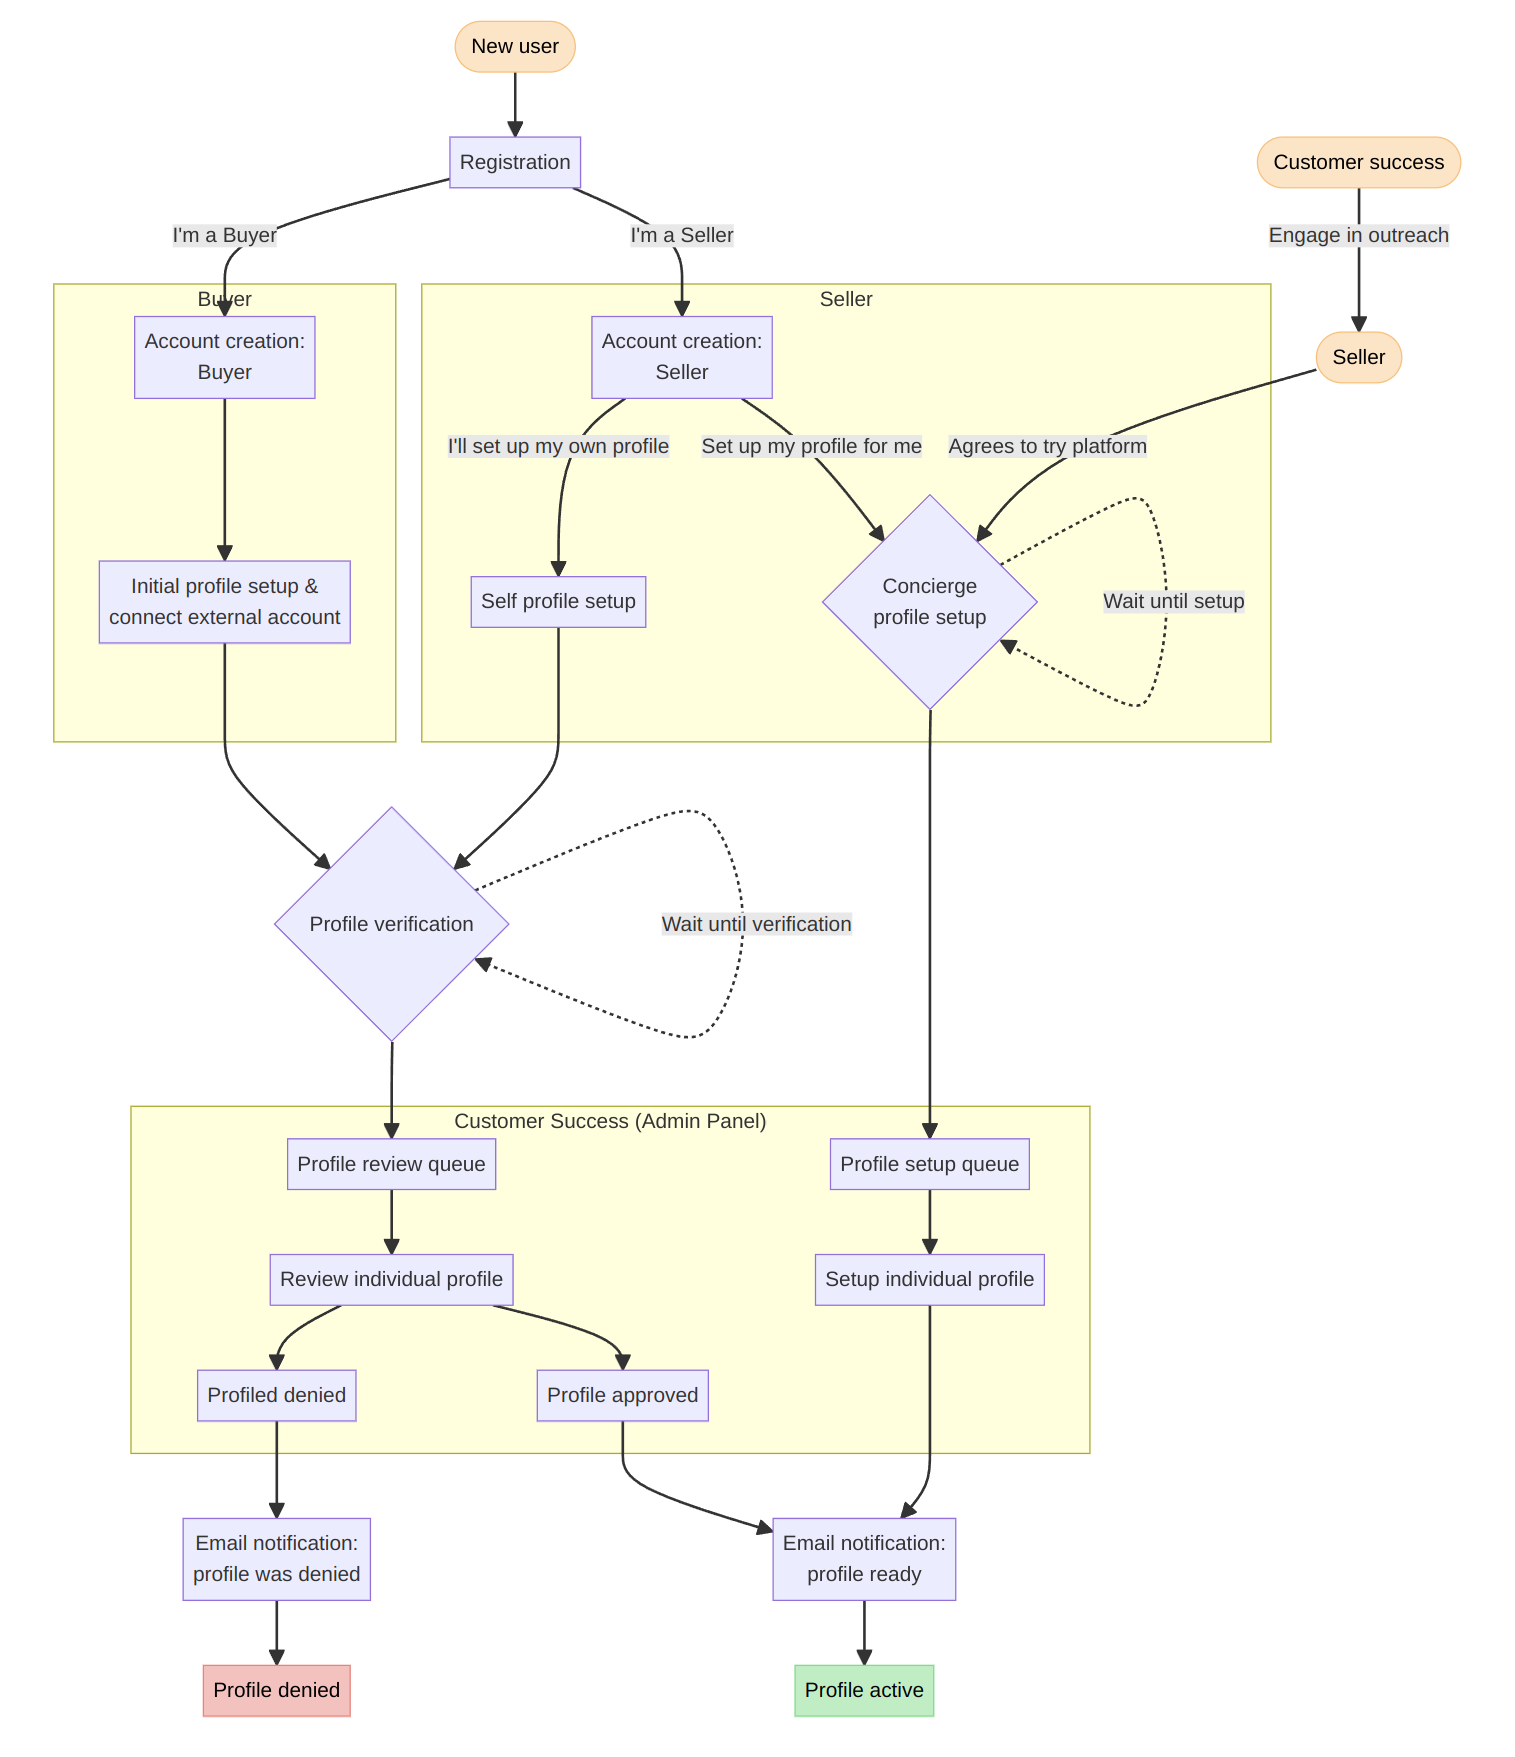 A flowchart modeling the two-sided marketplace user registration flow